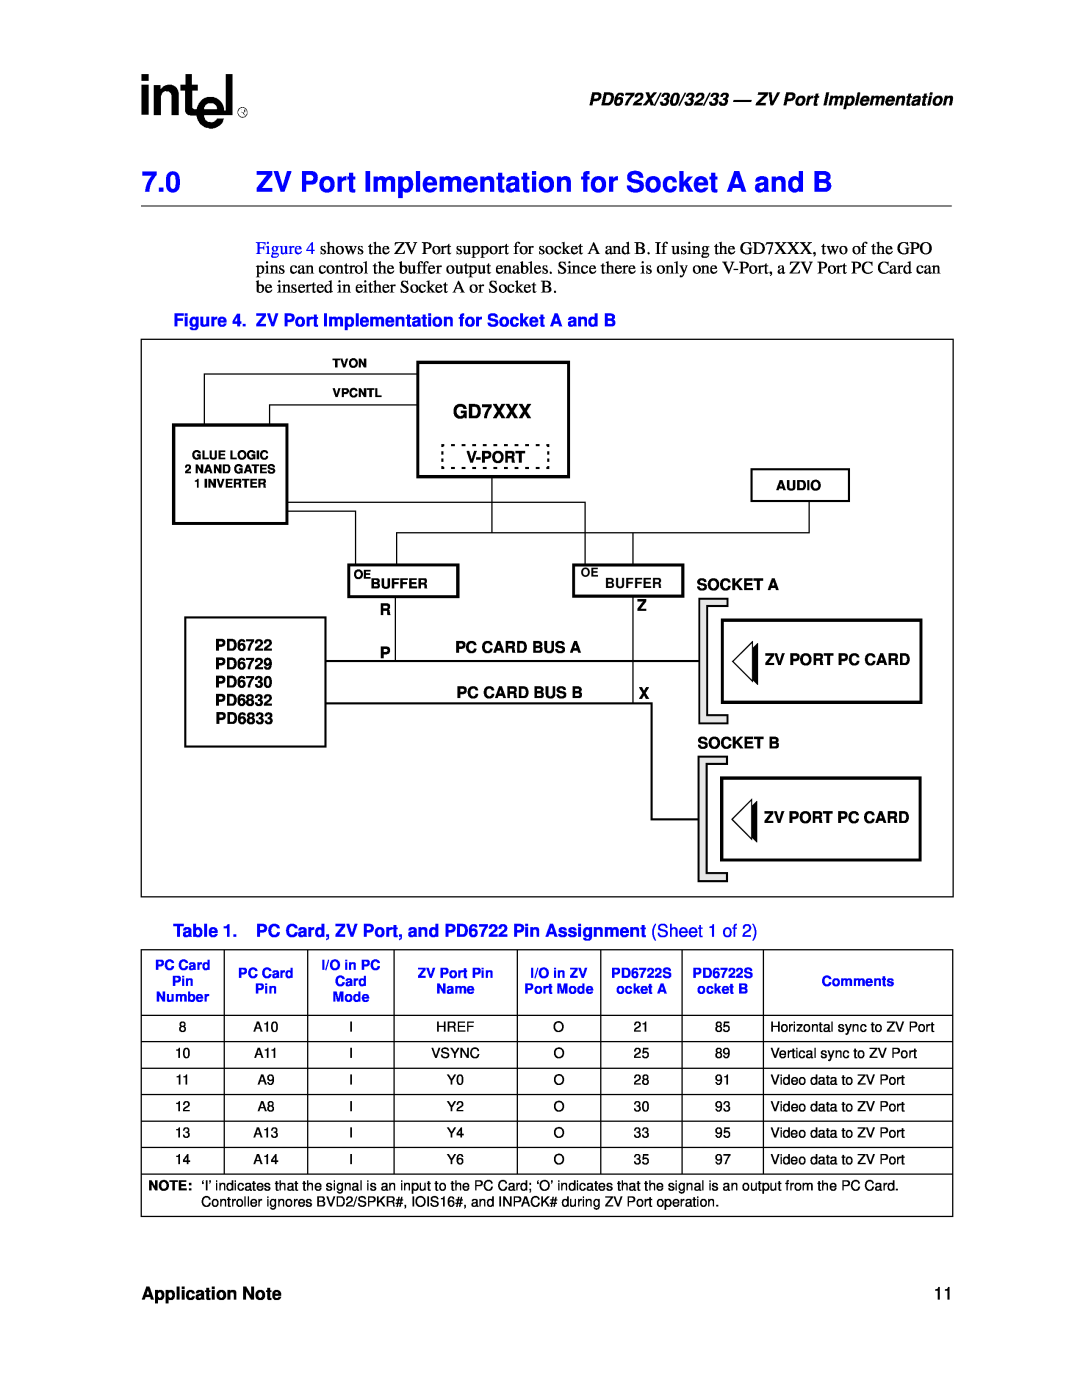 Intel 7.0ZV Port Implementation for Socket A and B, GD7XXX, PD672X/30/32/33 - ZV Port Implementation, Application Note 